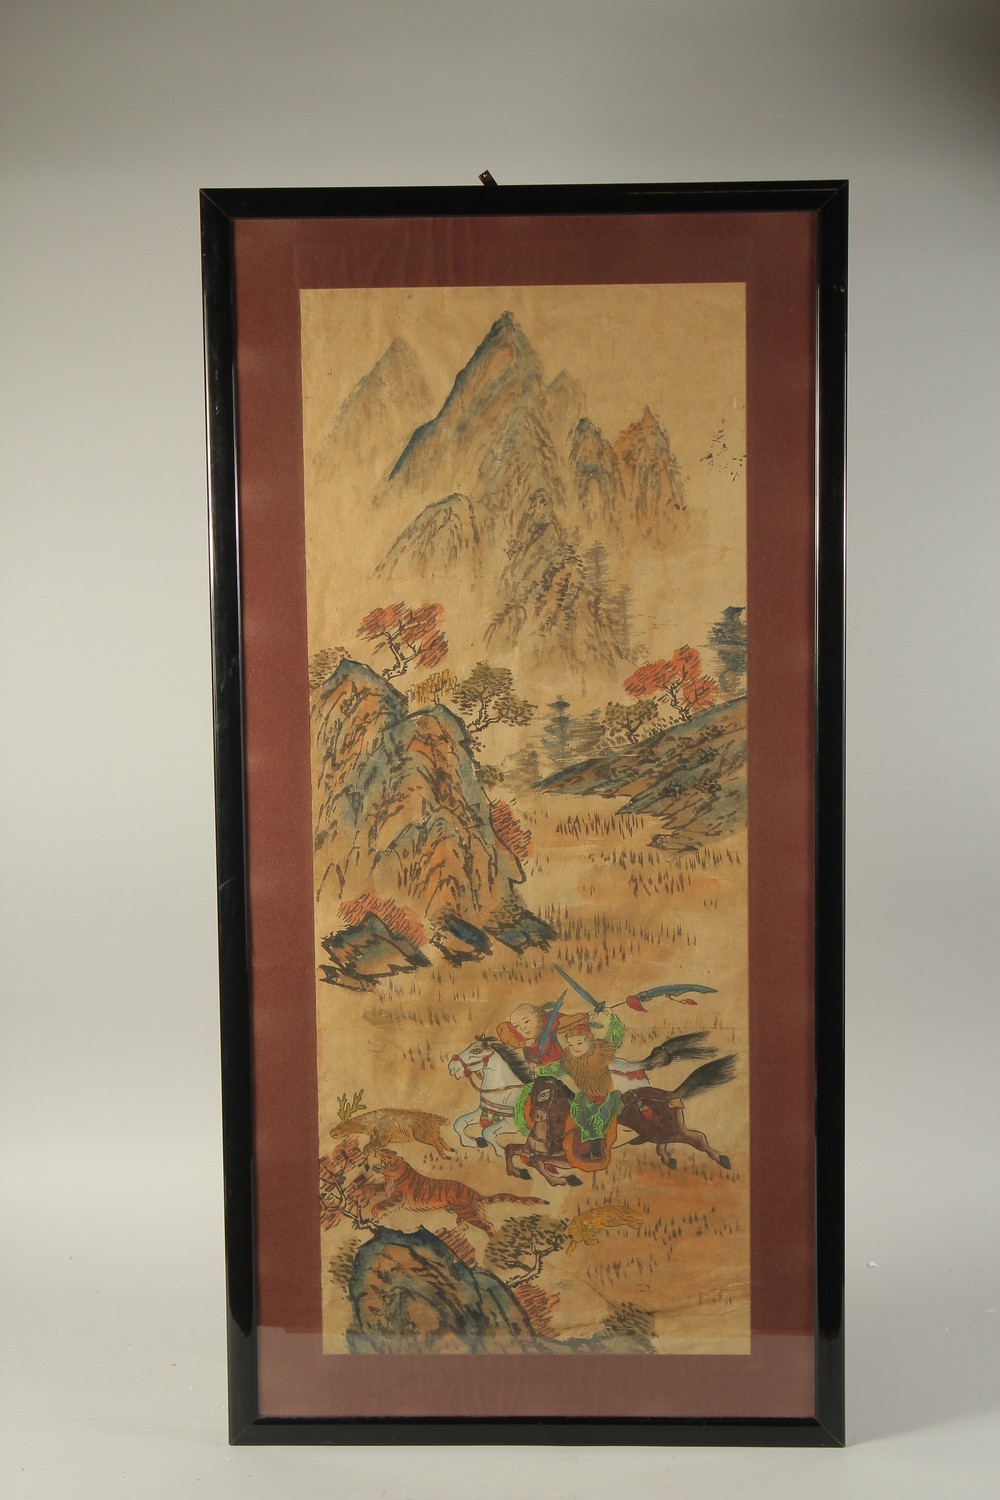 A CHINESE PAINTING ON PAPER, depicting hunters on horseback chasing a tiger within a mountainous